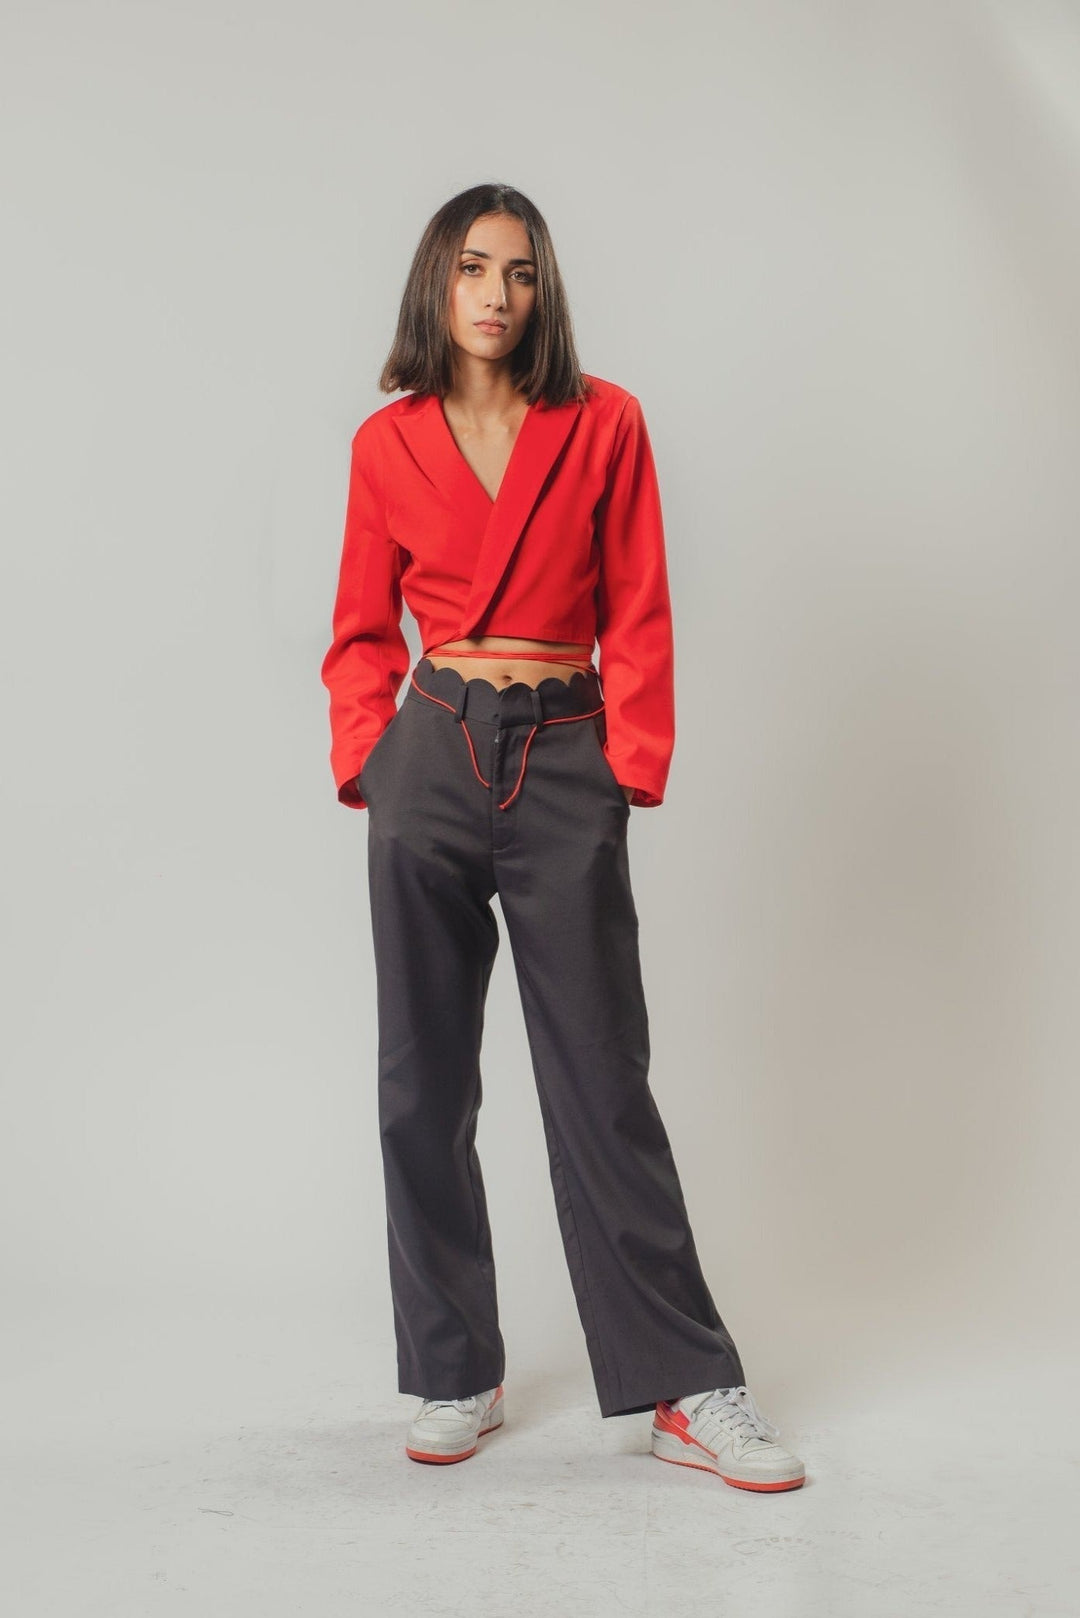 Strings Attached Cropped Blazer in Red Nolabels.in